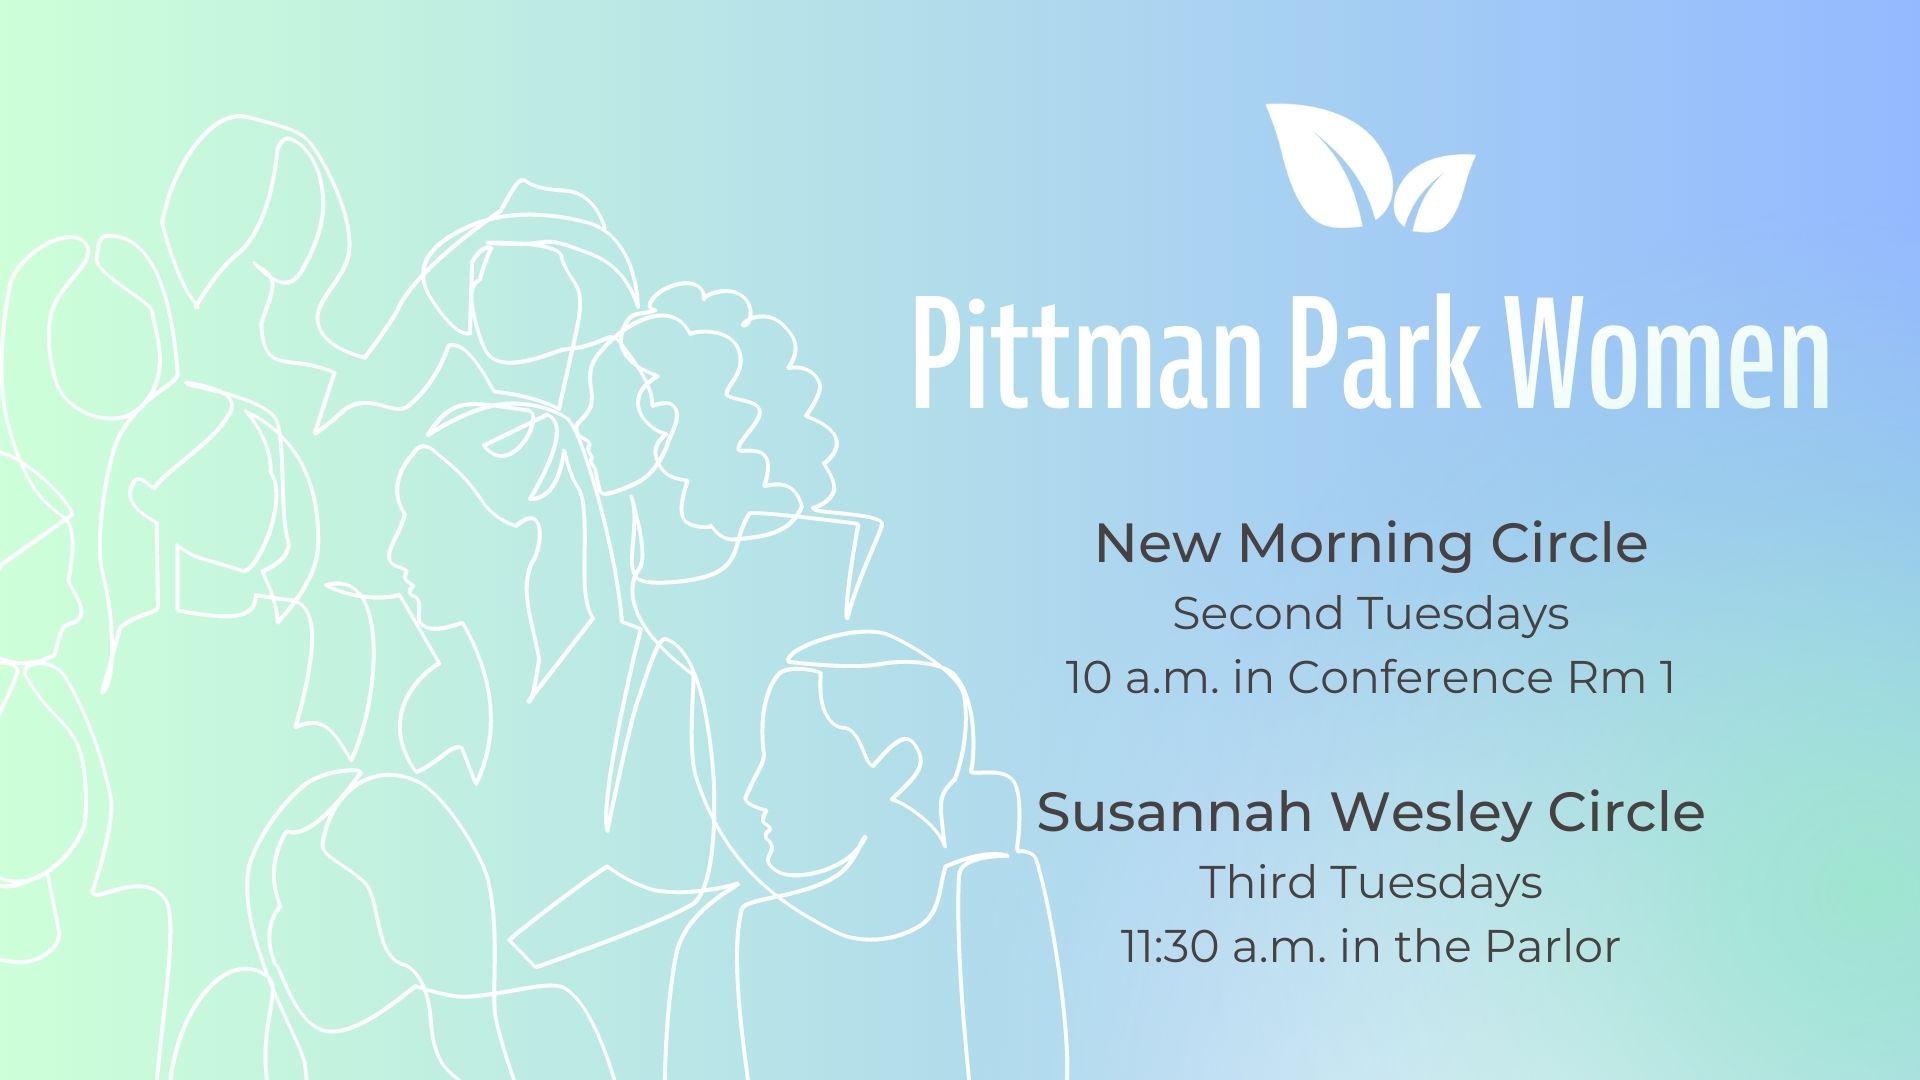 abstract line drawing of a group of women on a soft gradient background and Pittman Park Women logo